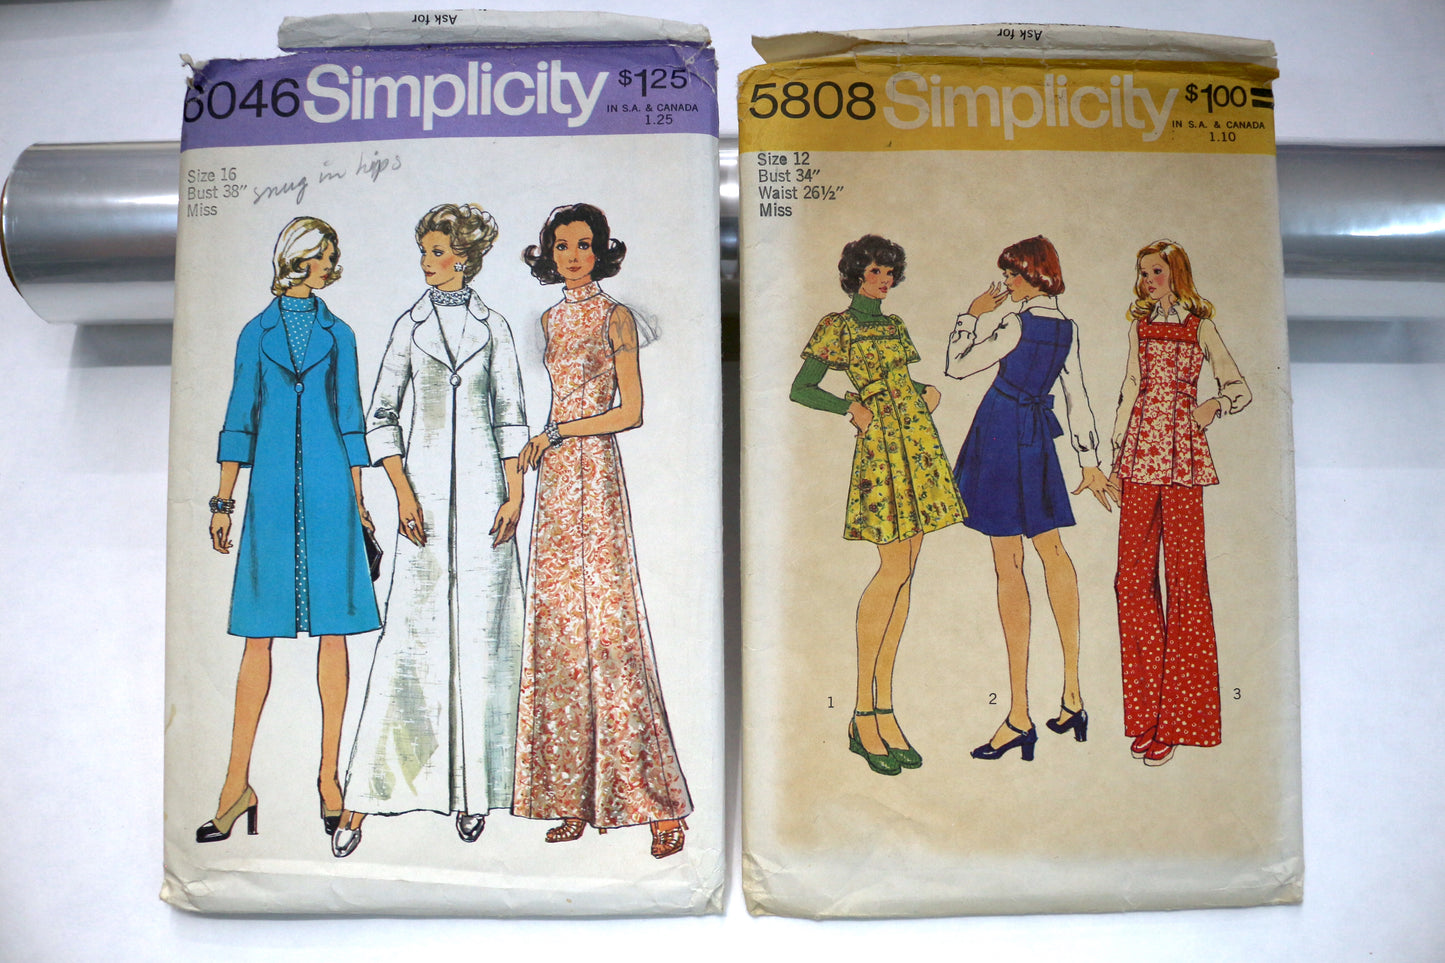 Simplicity 6046 Sewing Pattern or Simplicity 5808 Sewing Pattern